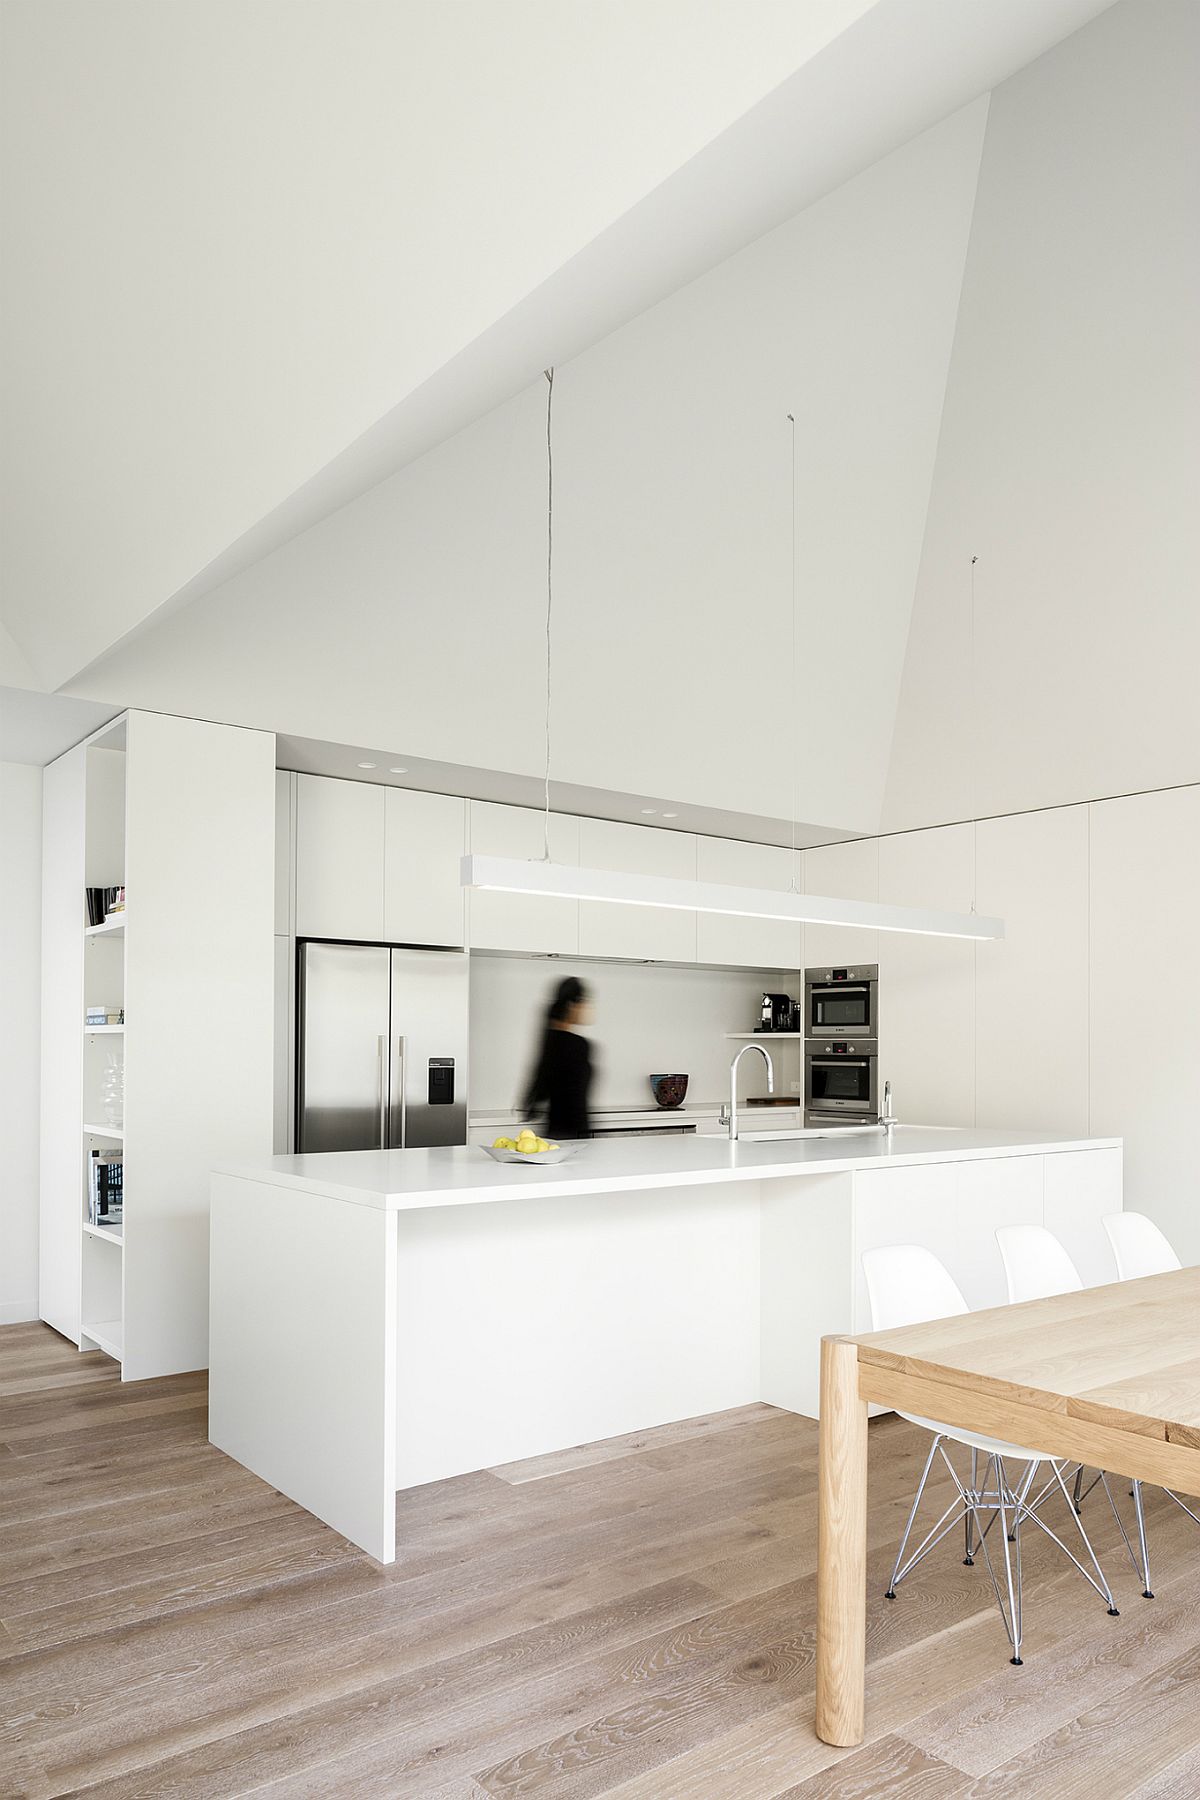 Dining-table-next-to-it-brings-the-woodsy-element-to-this-polished-corner-kitchen-in-white